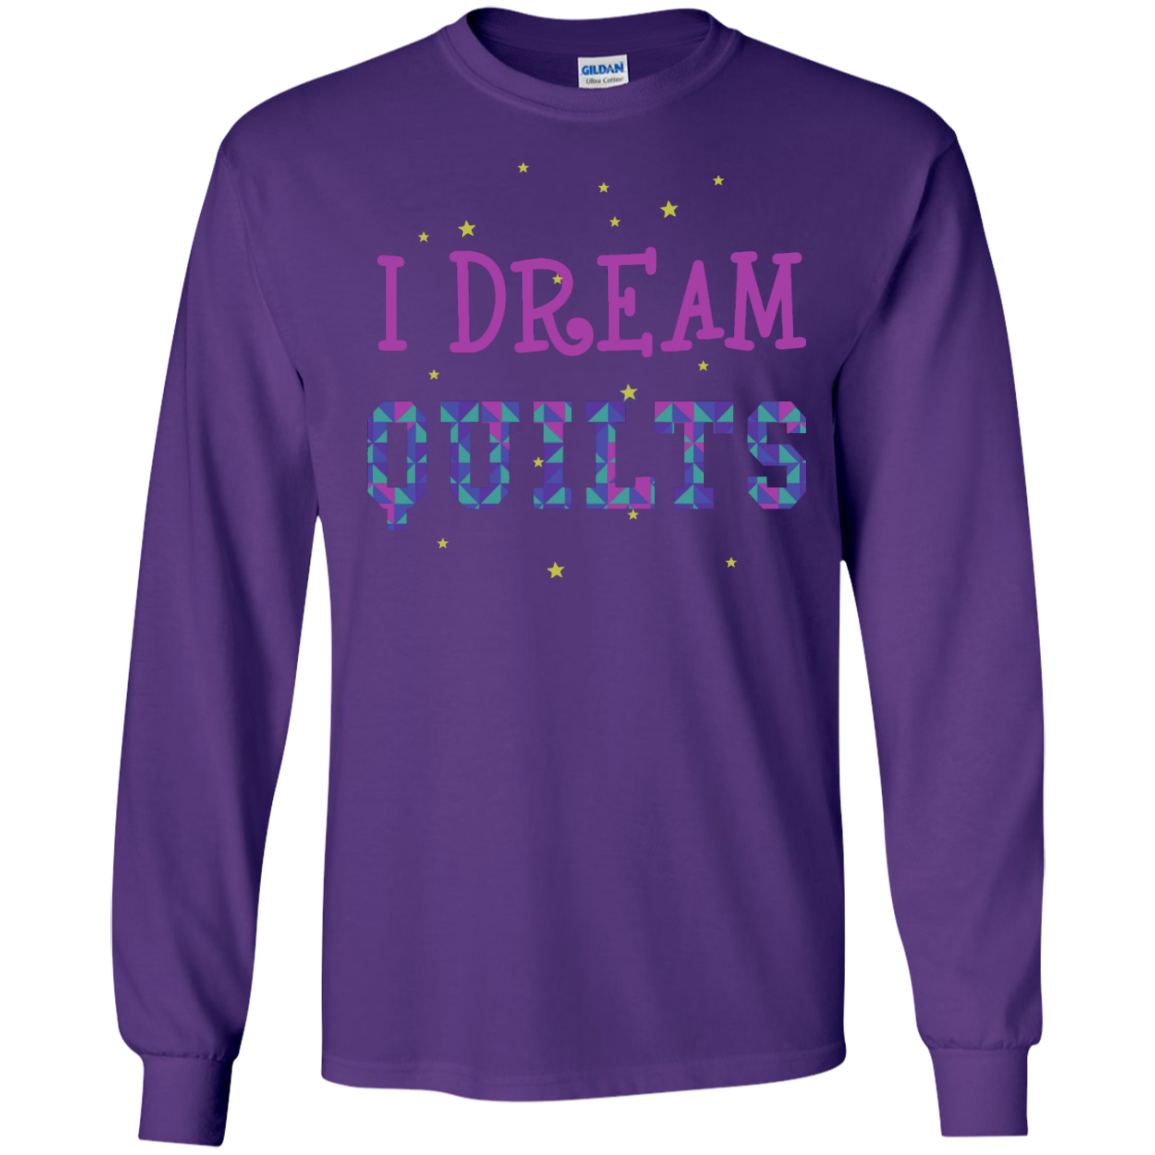 I Dream Quilts Long Sleeve Ultra Cotton T-Shirt - Crafter4Life - 7